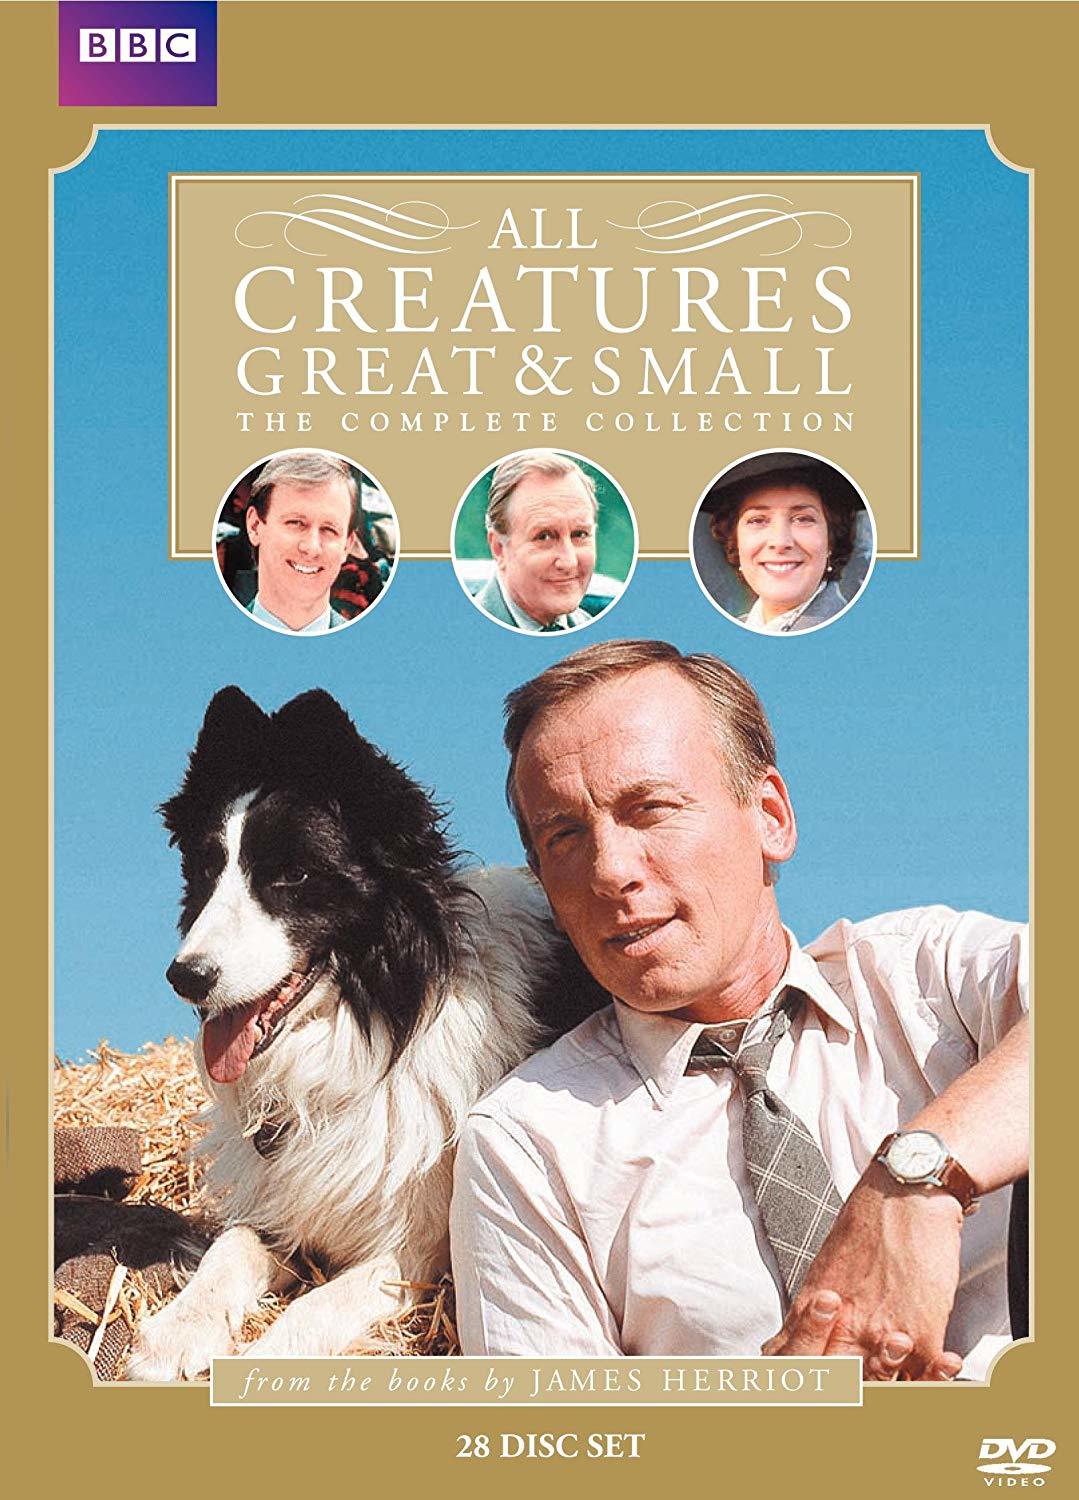 All Creatures Great & Small The Complete Series Collection (DVD) (BBC